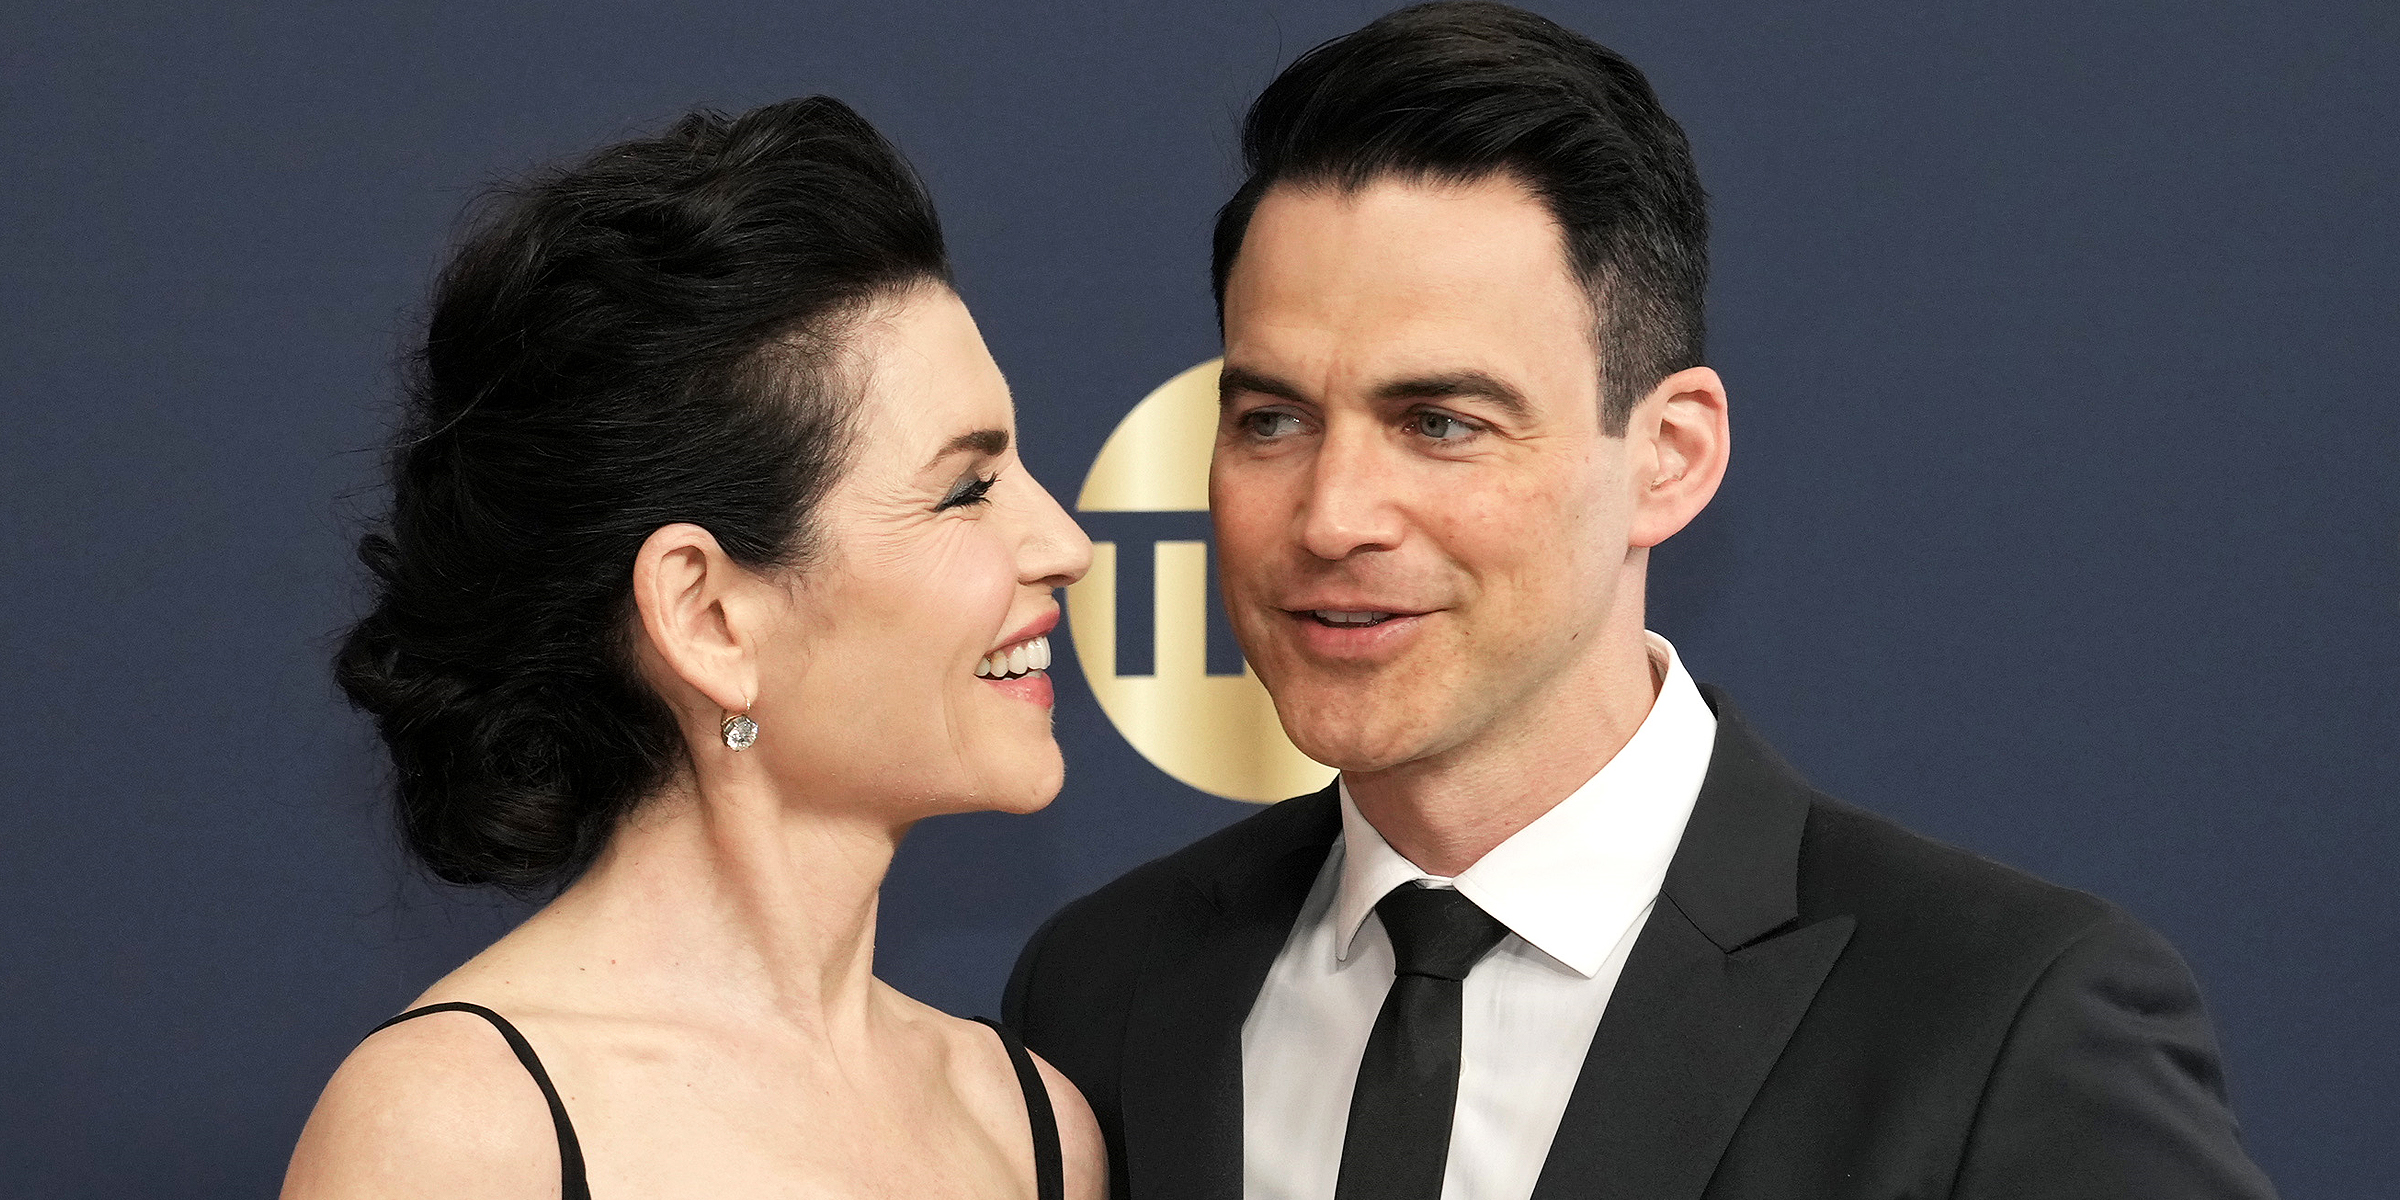 Julianna Margulies and Keith Lieberthal | Source: Getty Images